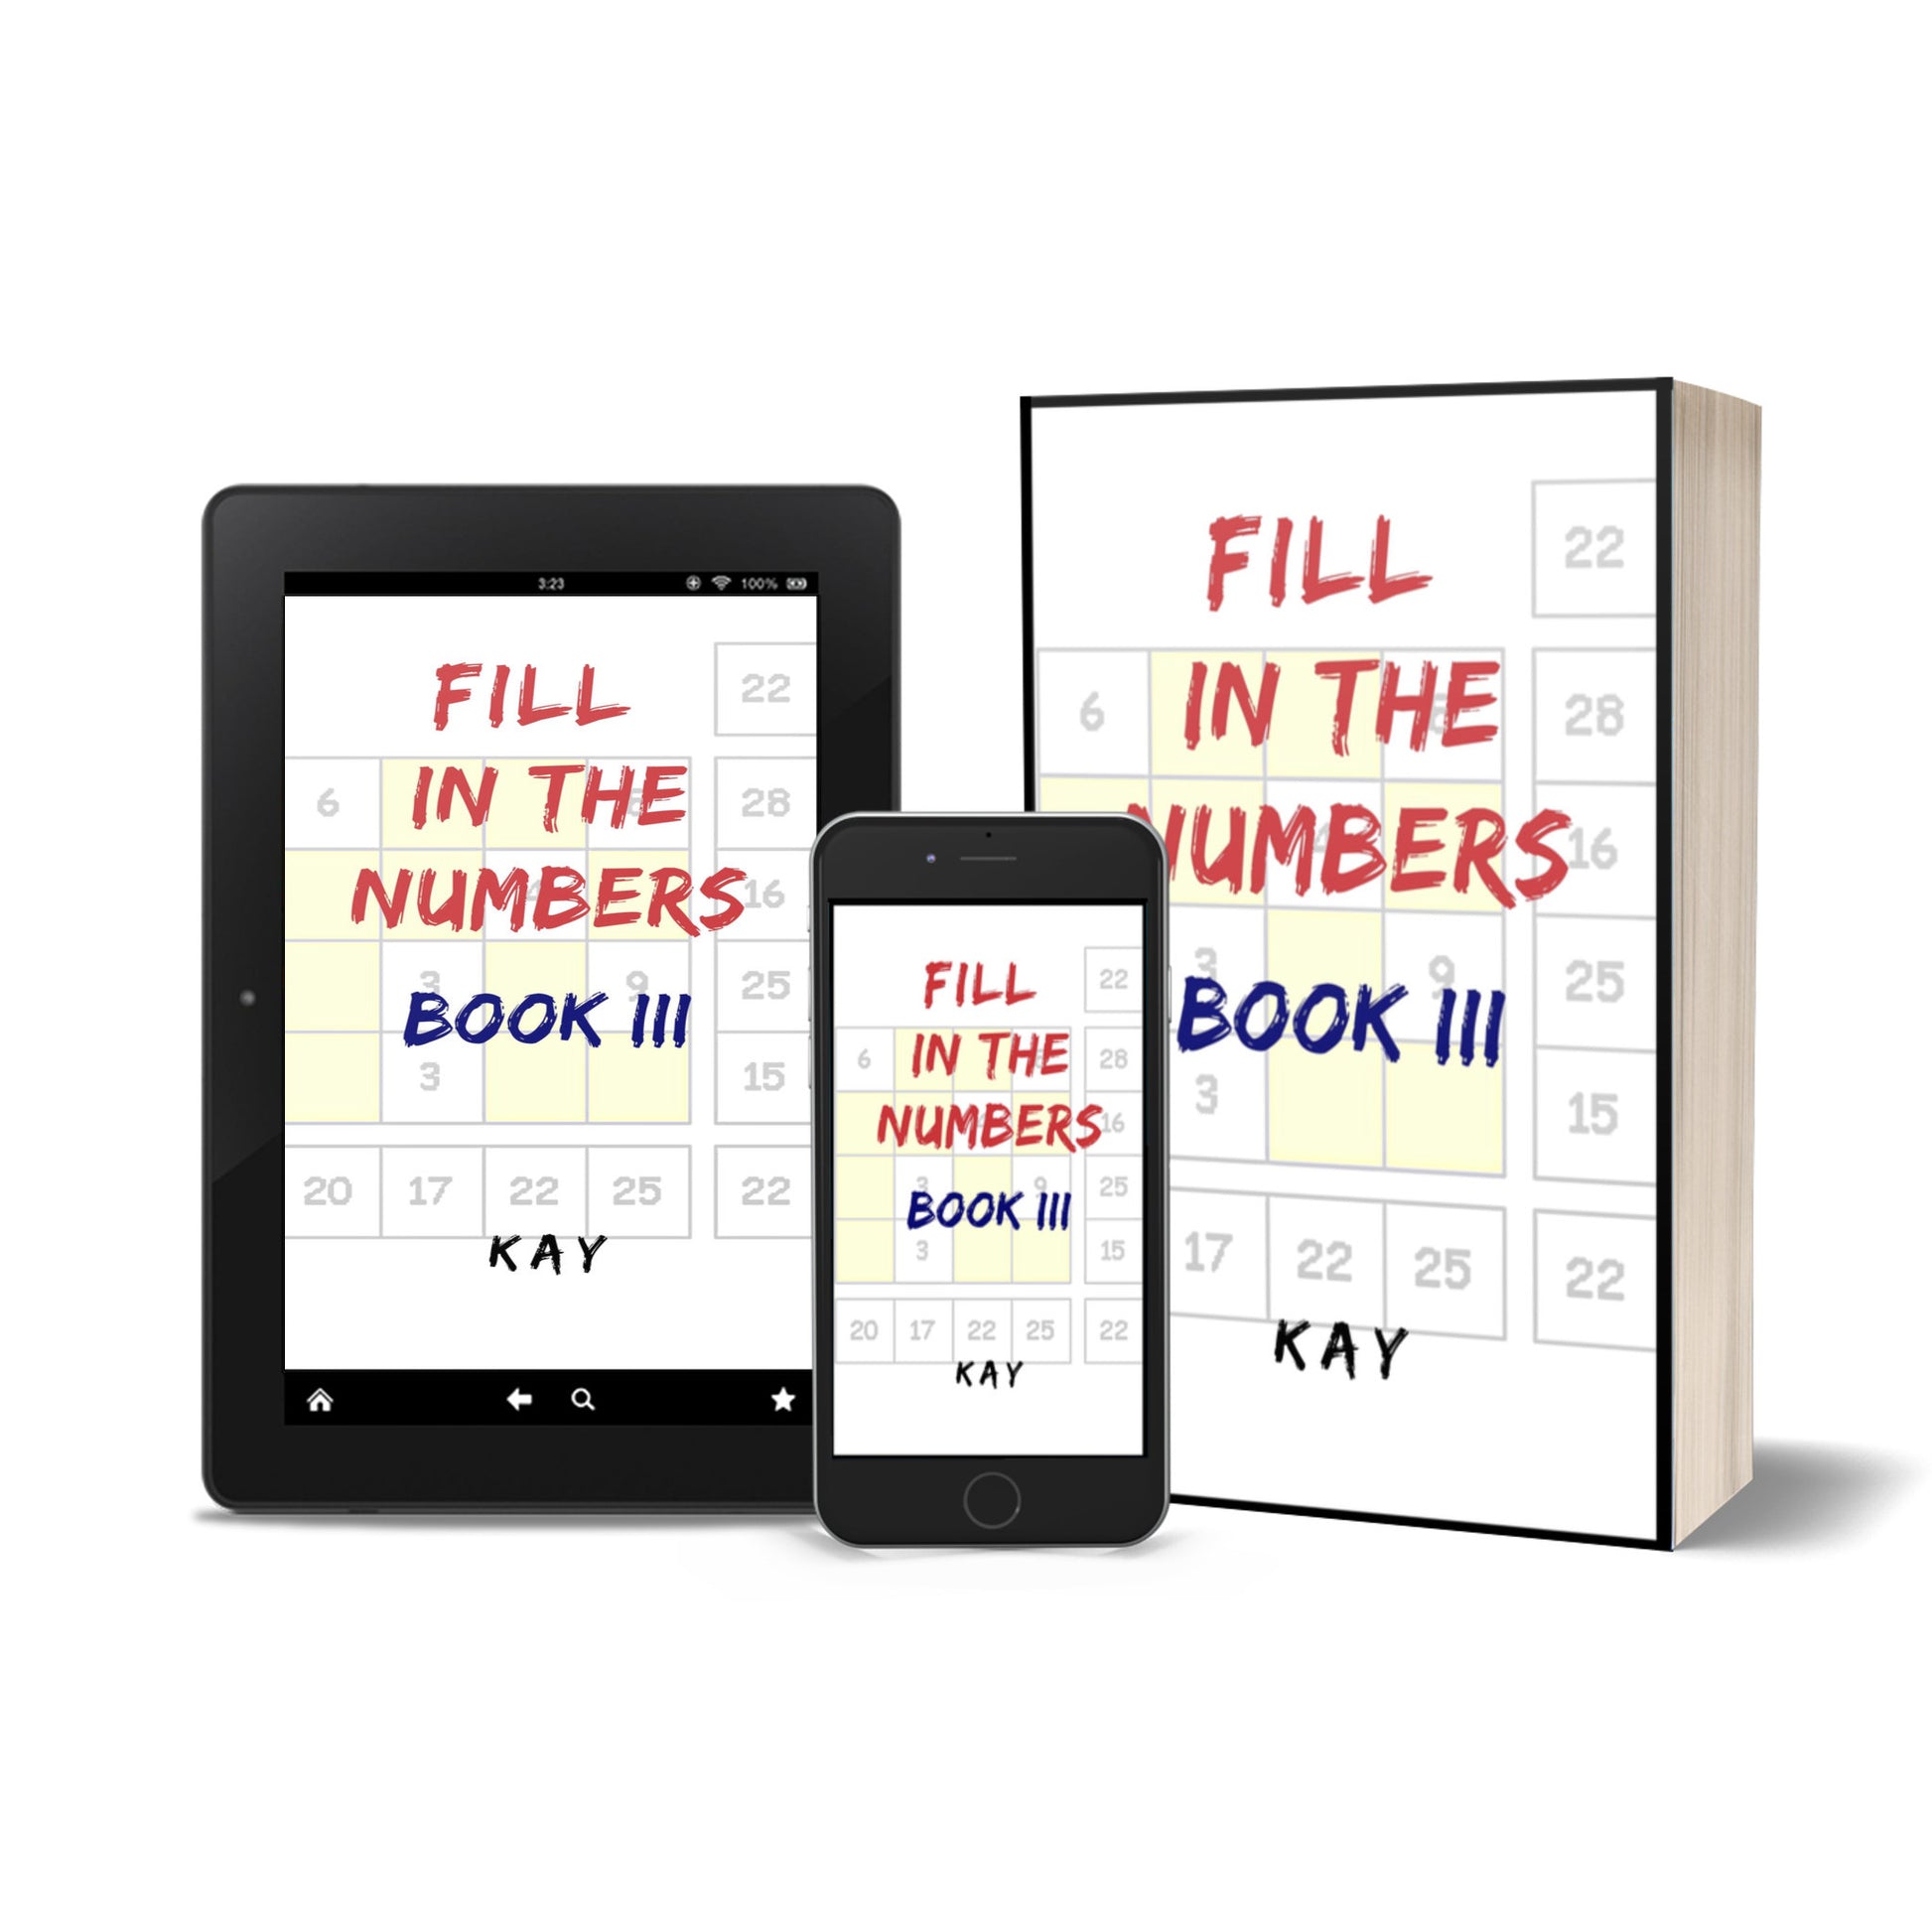 Fill in the Numbers Book III Digital Download